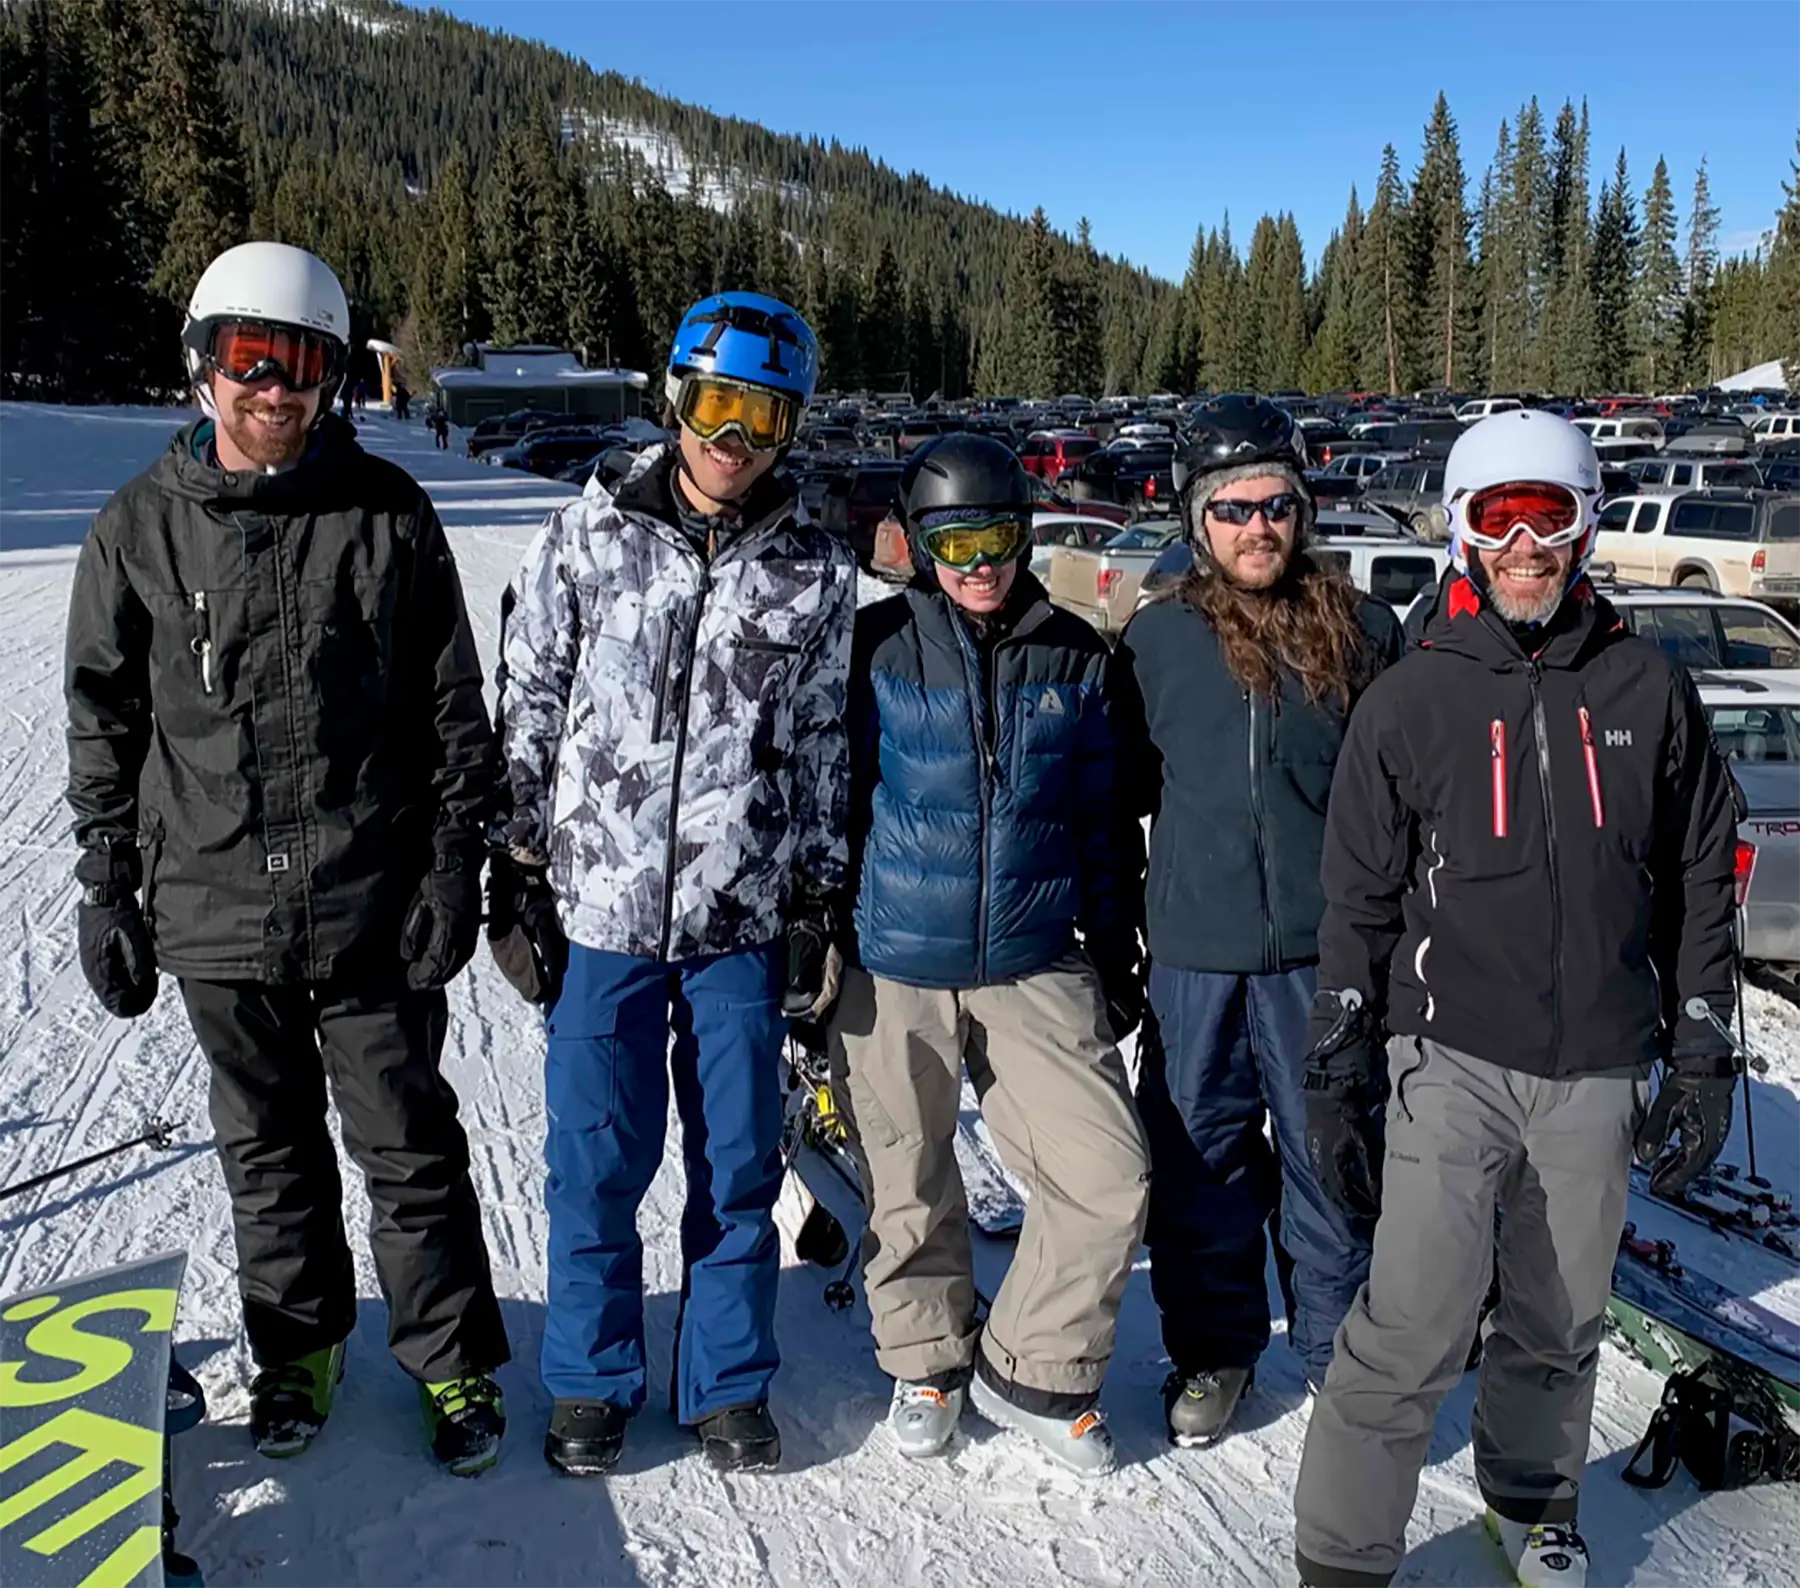 Disharoon, Neeves, and three fellow researchers dressed in snowboarding gear at a snowboarding hill.